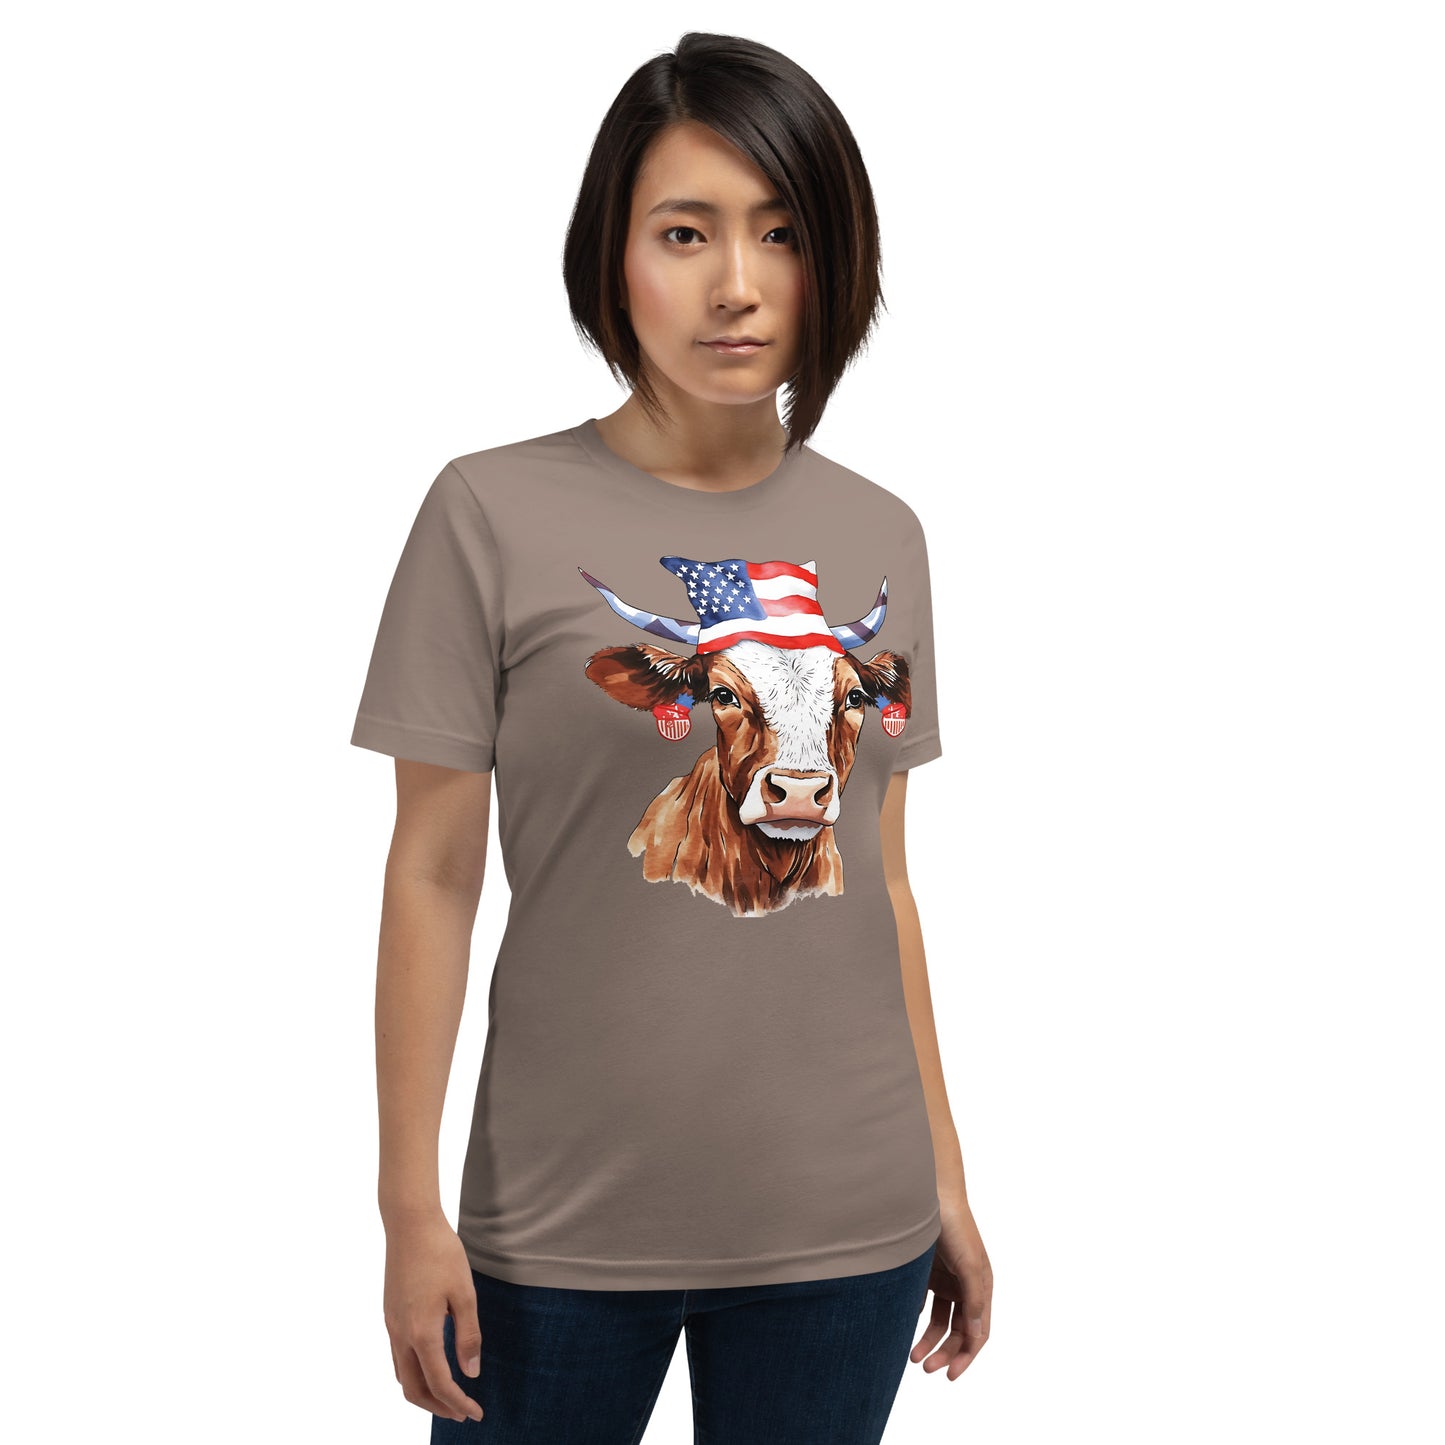 Patriotic Cow Tshirt For Cow Lovers Pebble Color